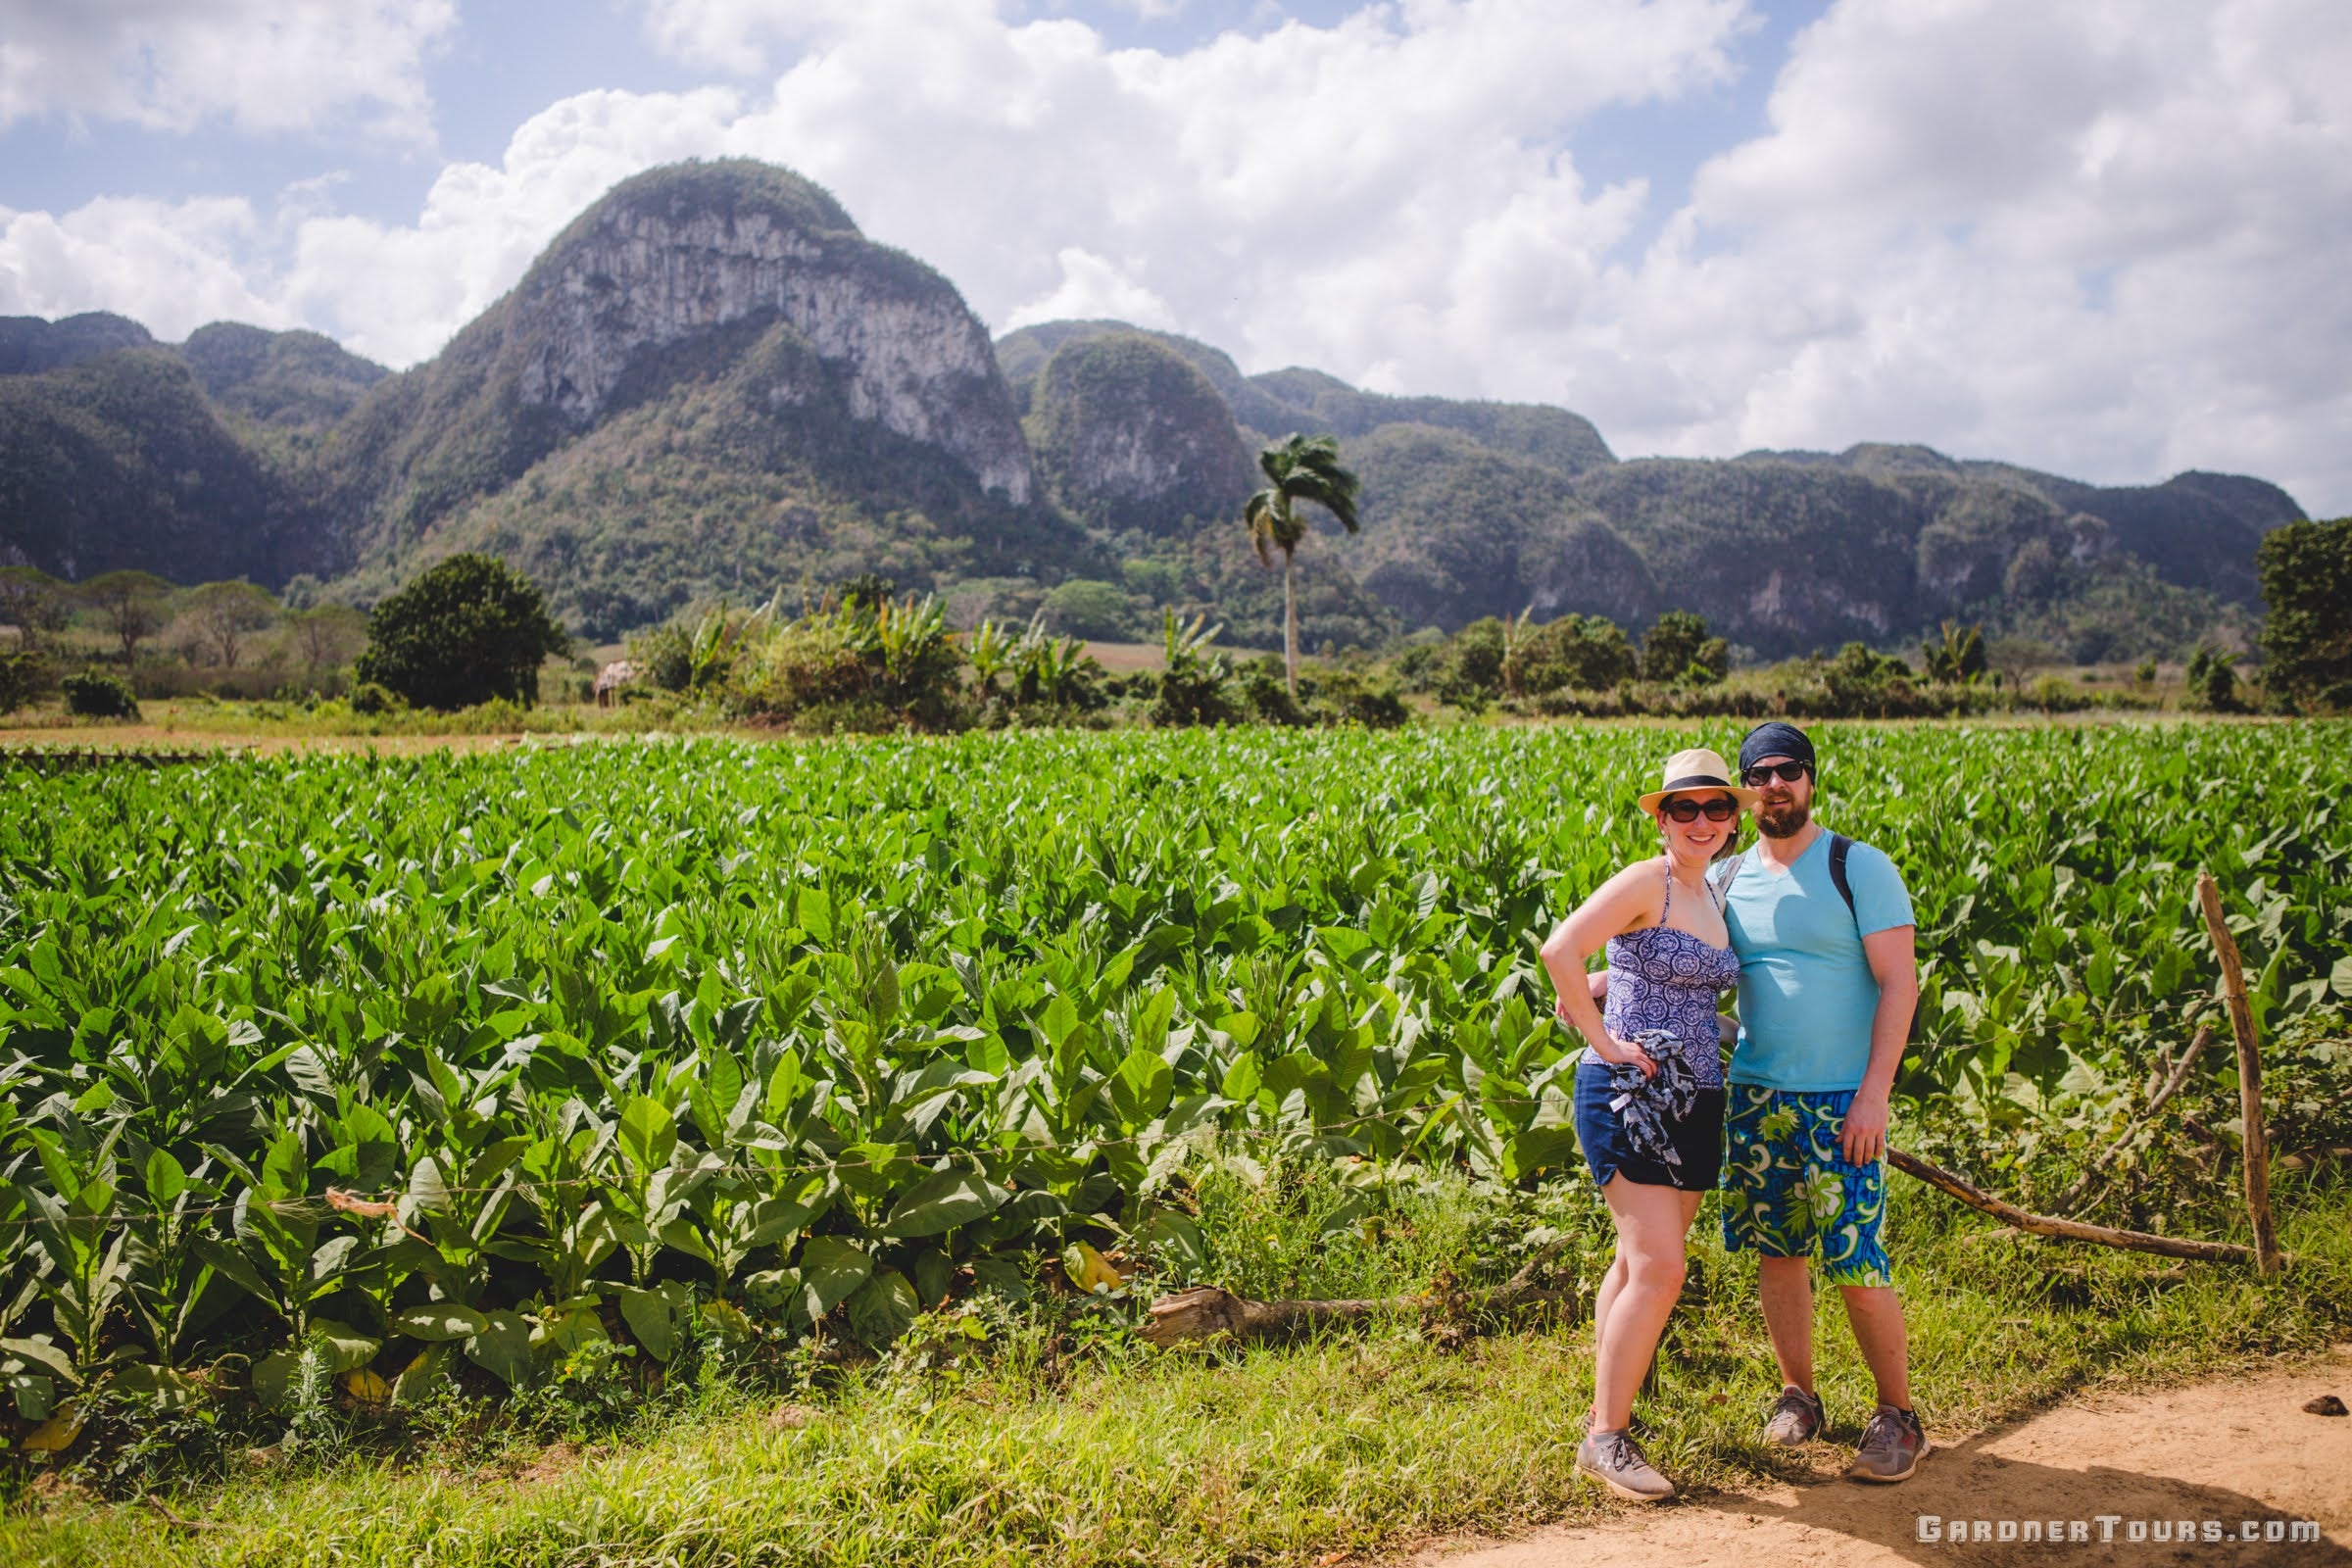 A Couple in the tobacco fields of the Vinales Valley, Cuba